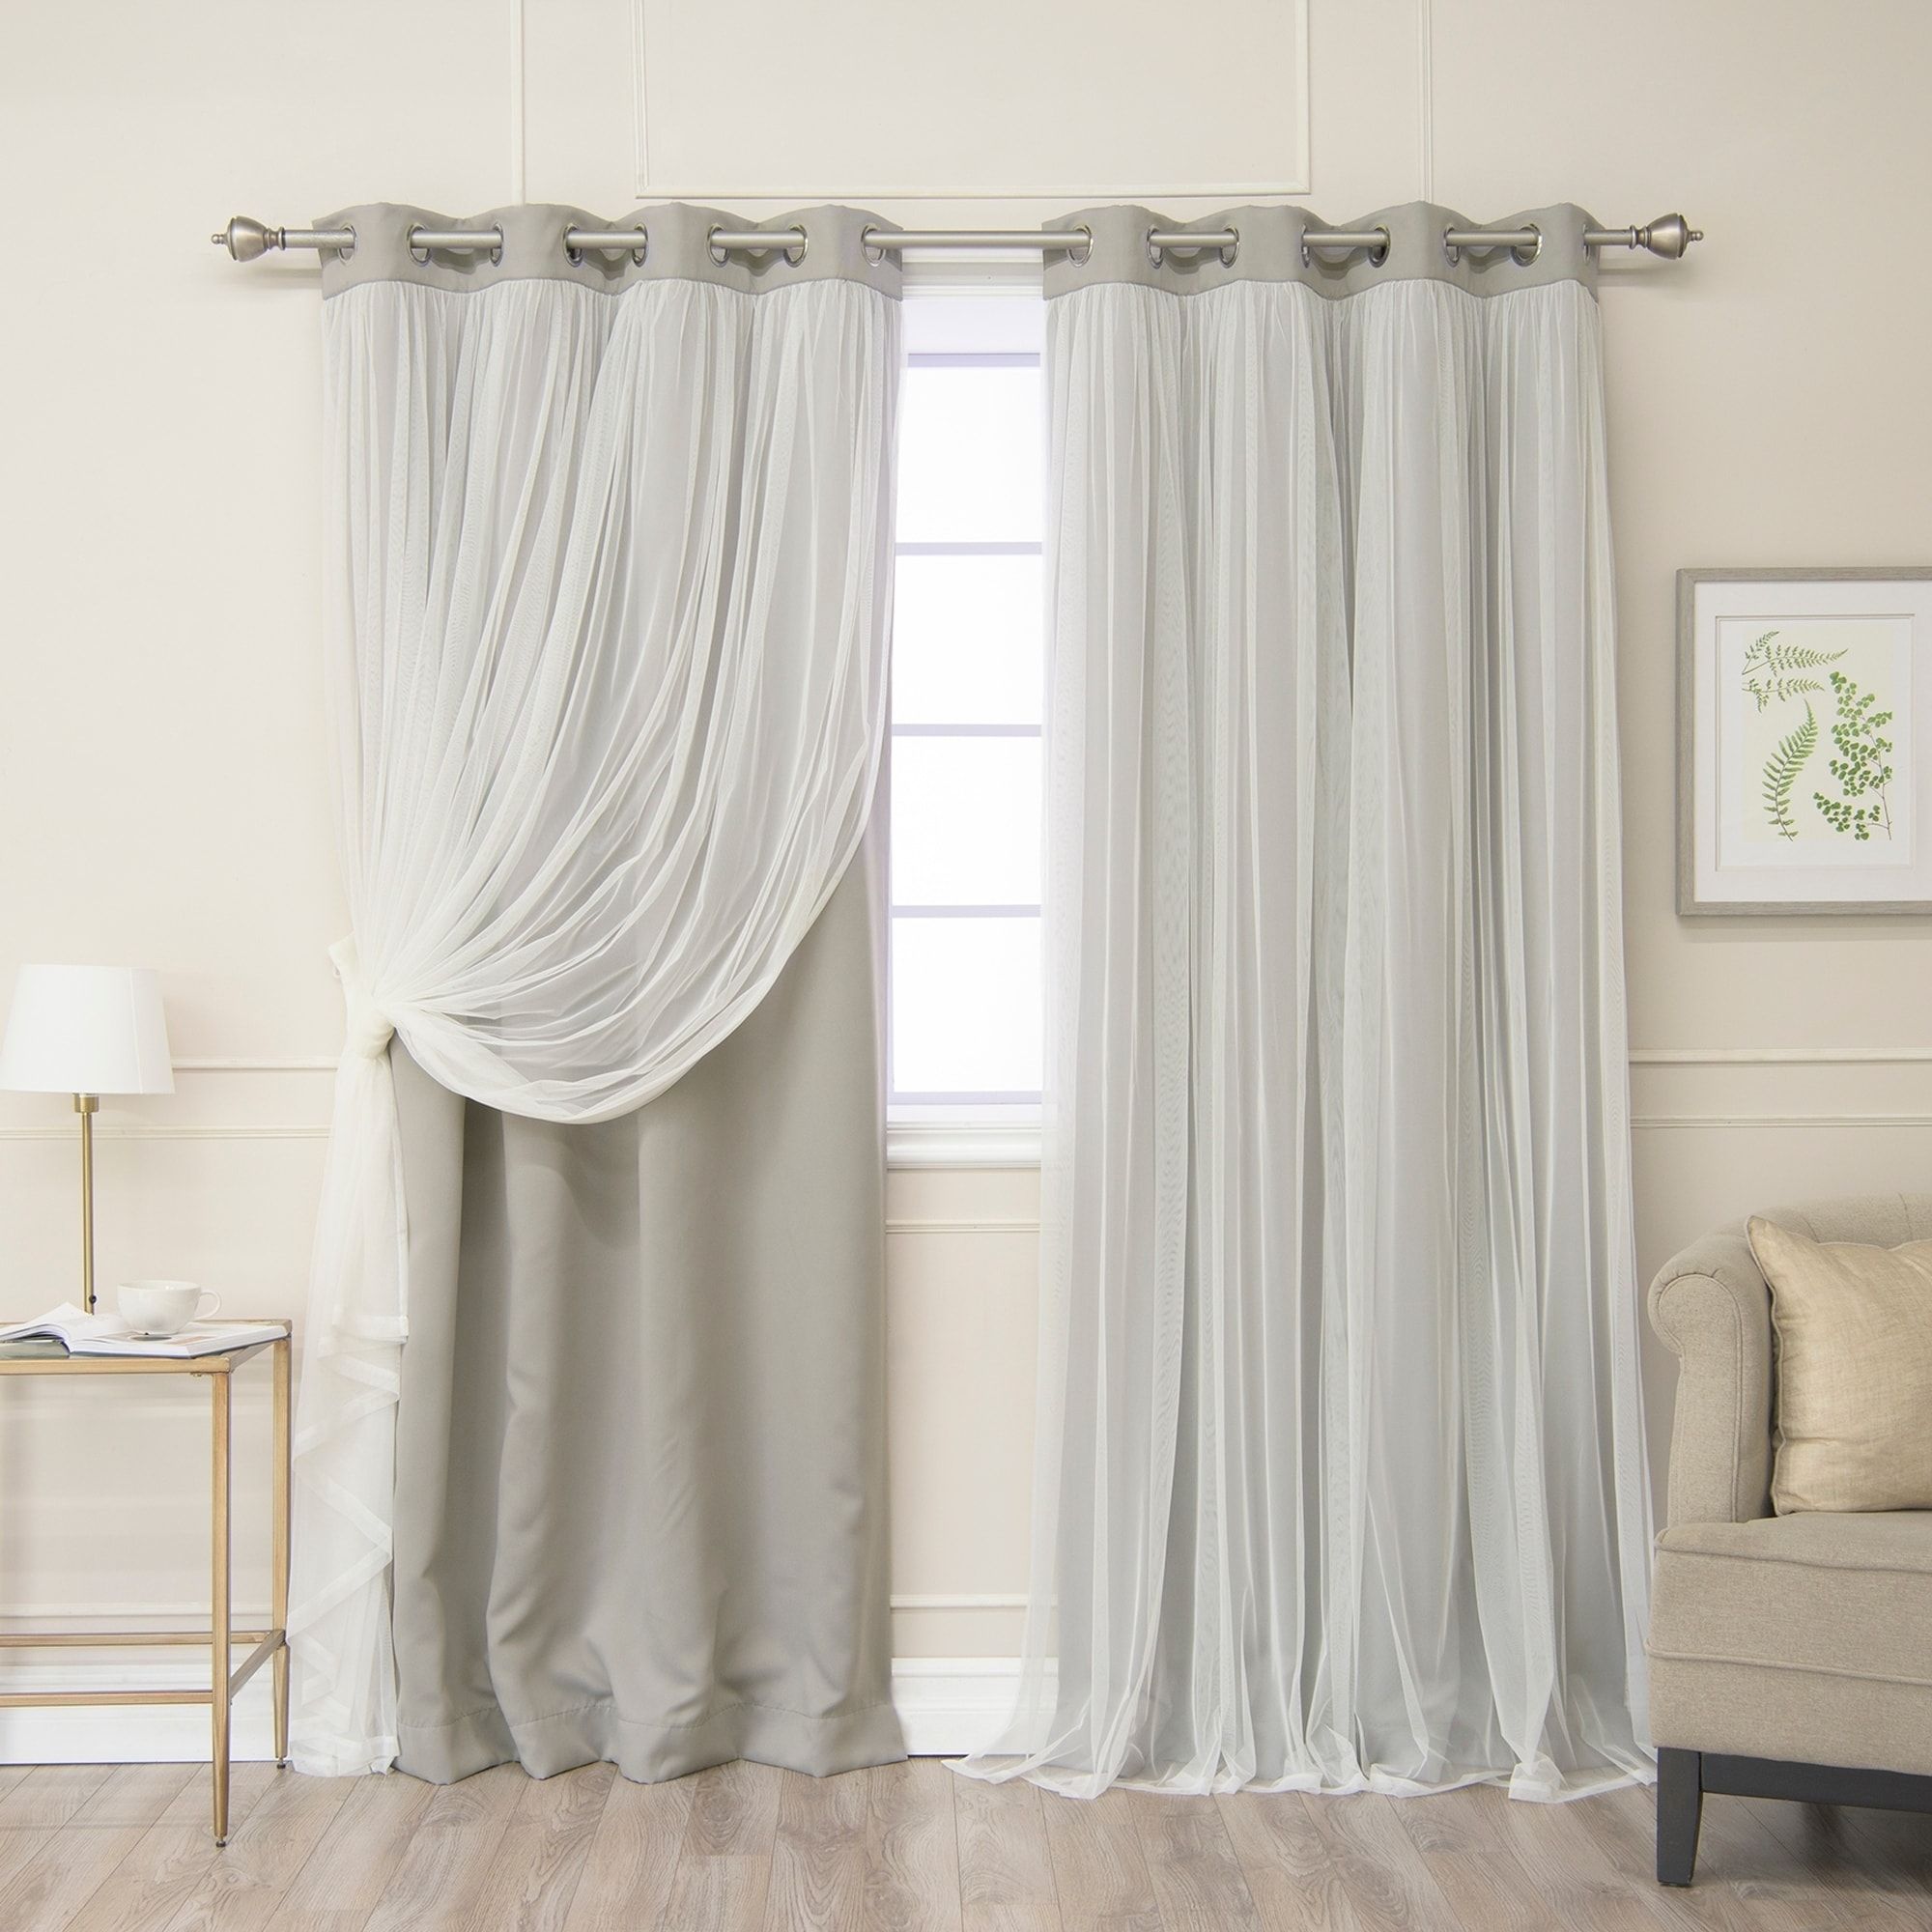 Aurora Home Gathered Tulle Overlay Blackout Curtain Panel Pair Intended For Star Punch Tulle Overlay Blackout Curtain Panel Pairs (View 21 of 30)